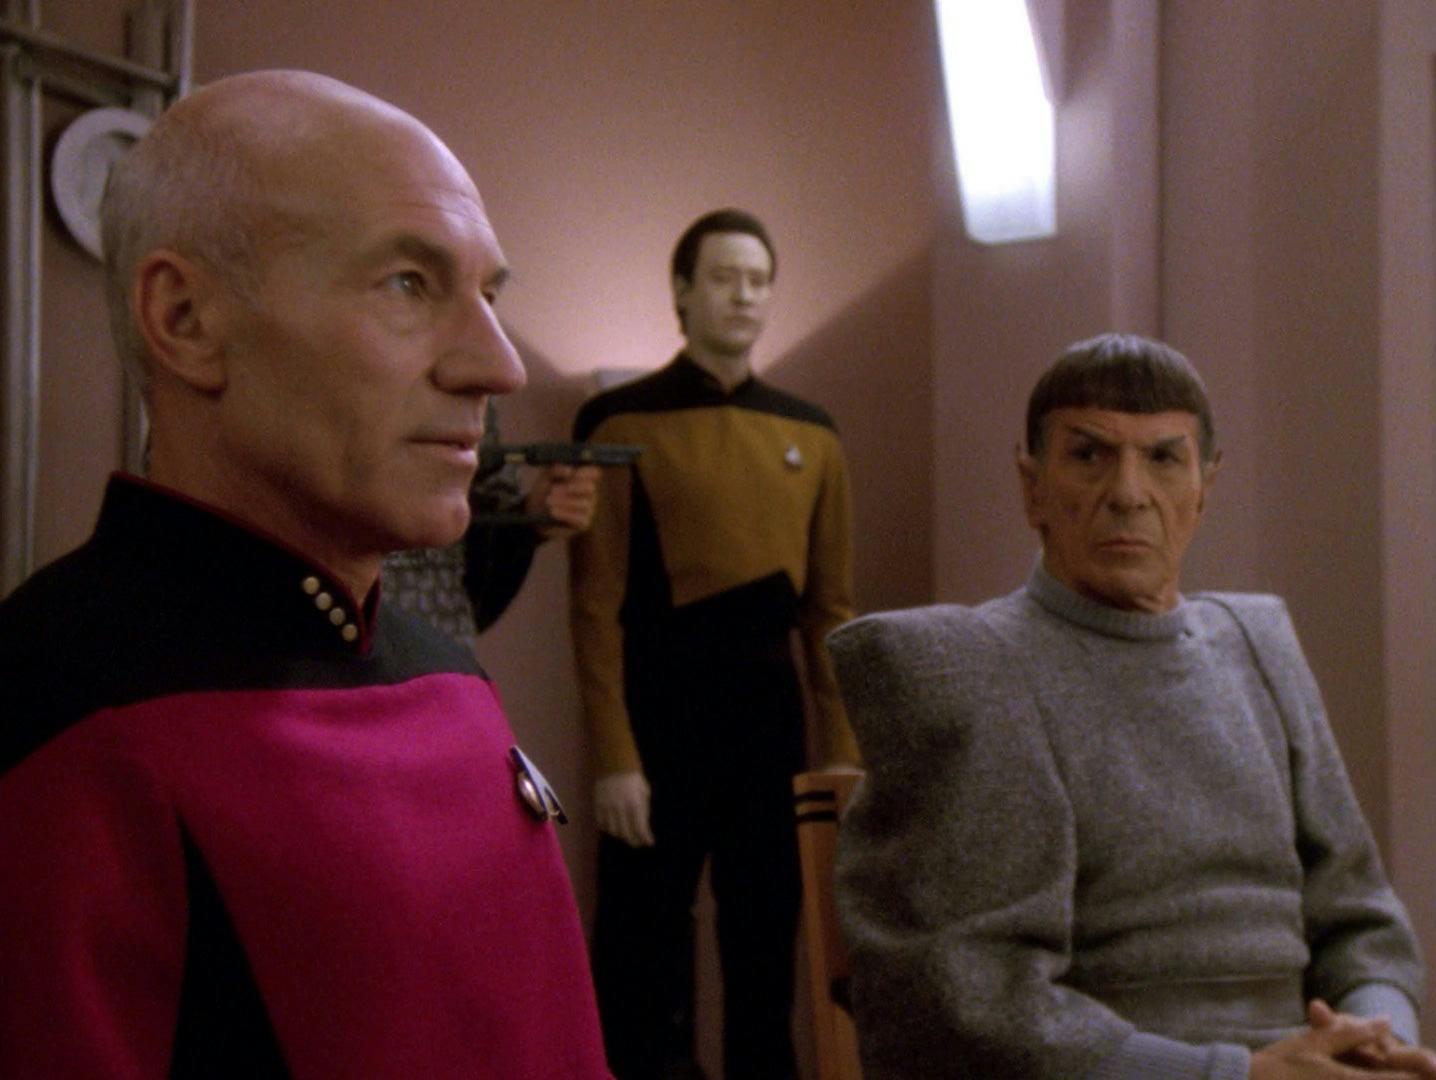 Captain Picard and Spock are held at phaser point. Data stands nearby.